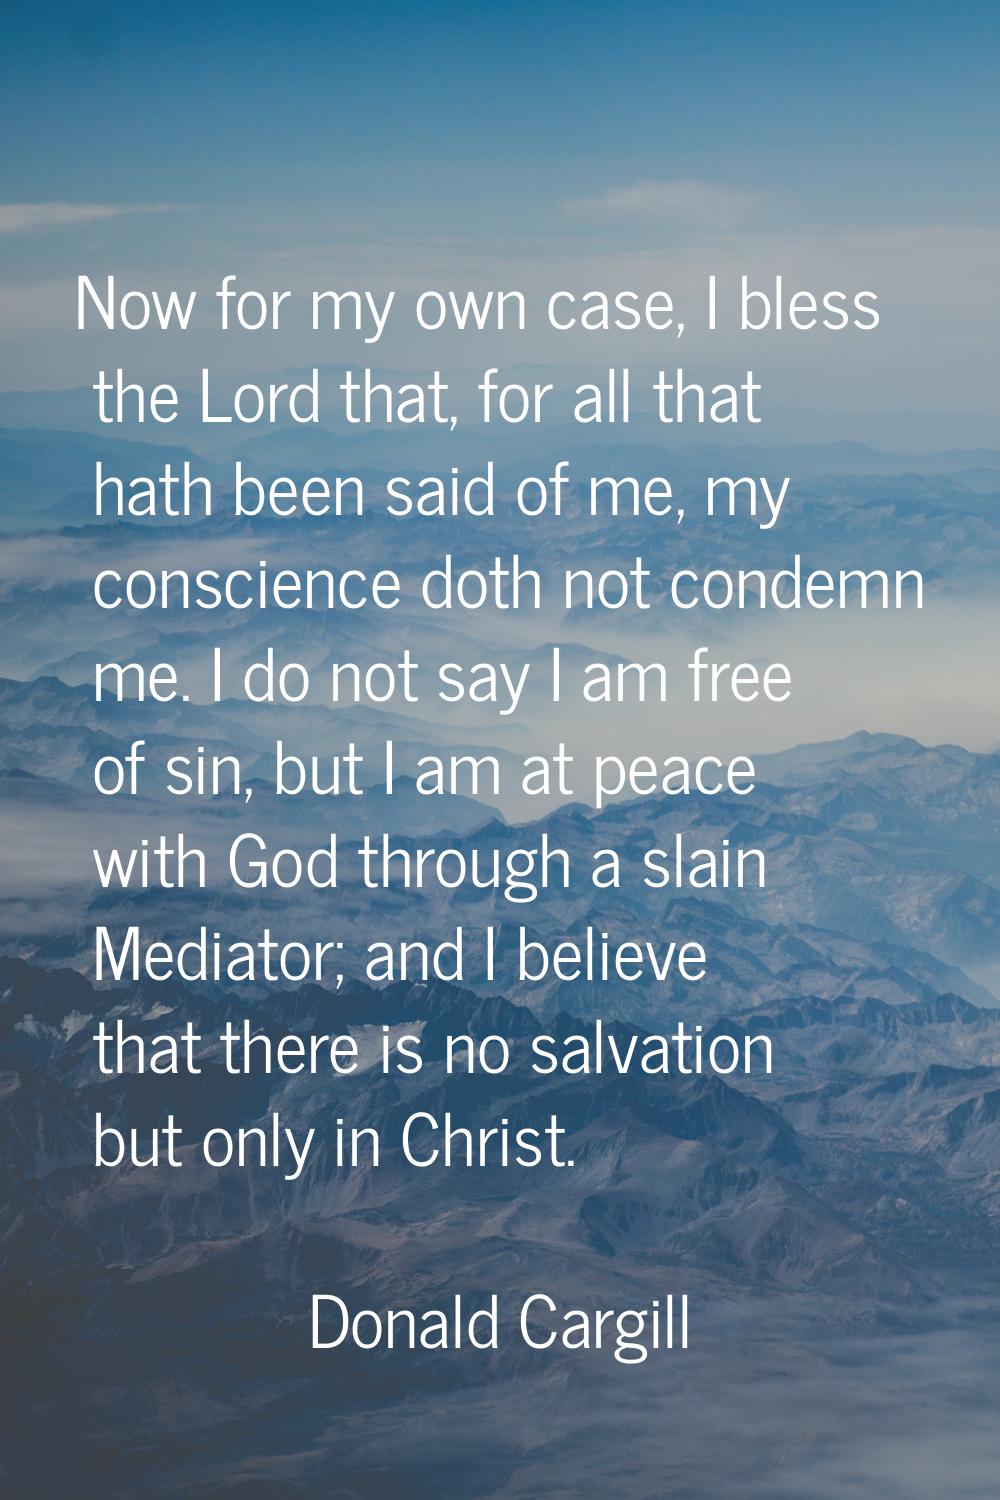 Now for my own case, I bless the Lord that, for all that hath been said of me, my conscience doth n